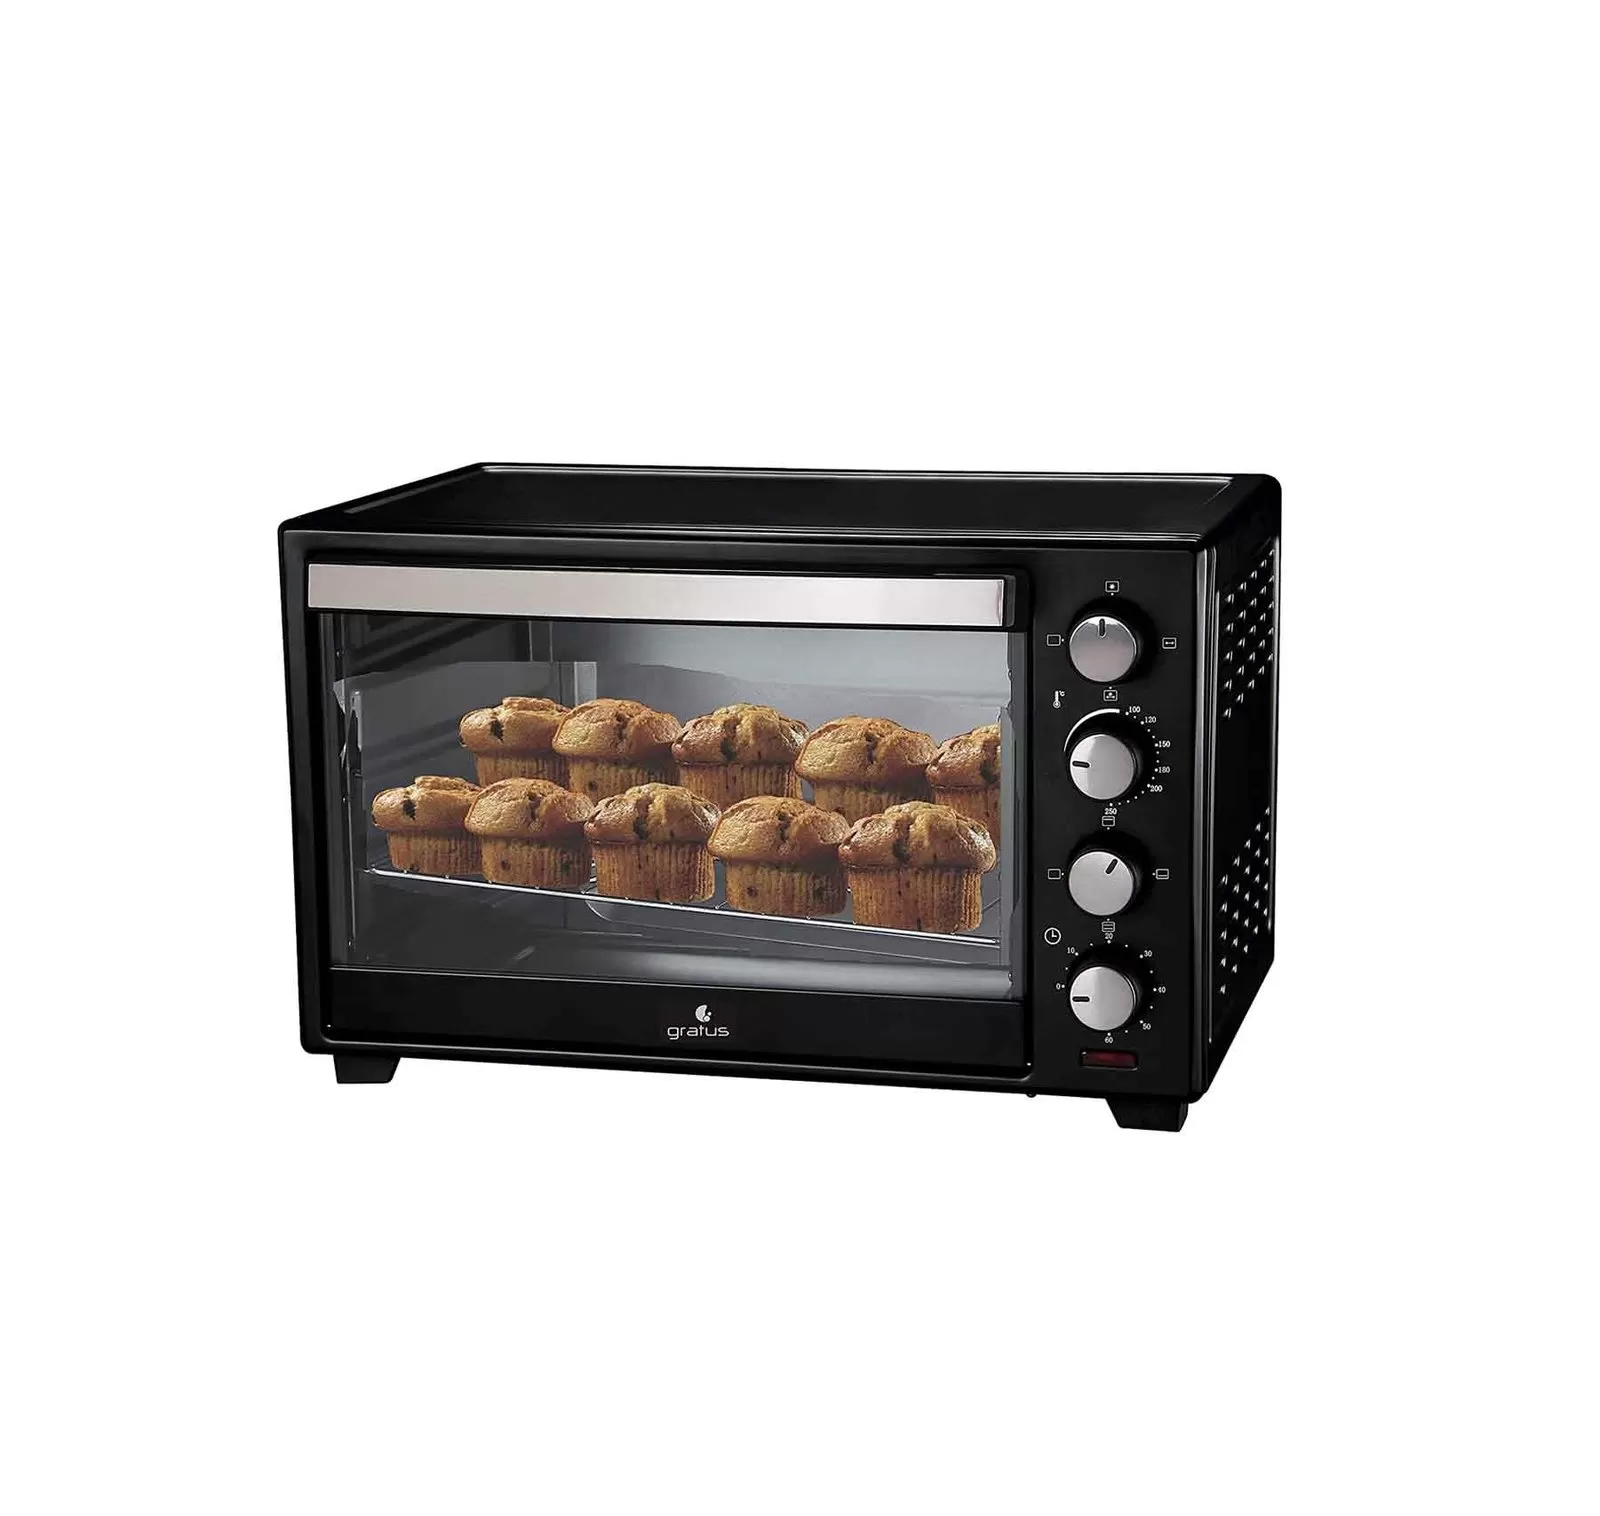 Gratus 48 Litres Oven With Toaster Grill Color Black Model-GOTG48TT | 1 Year Brand Warranty.